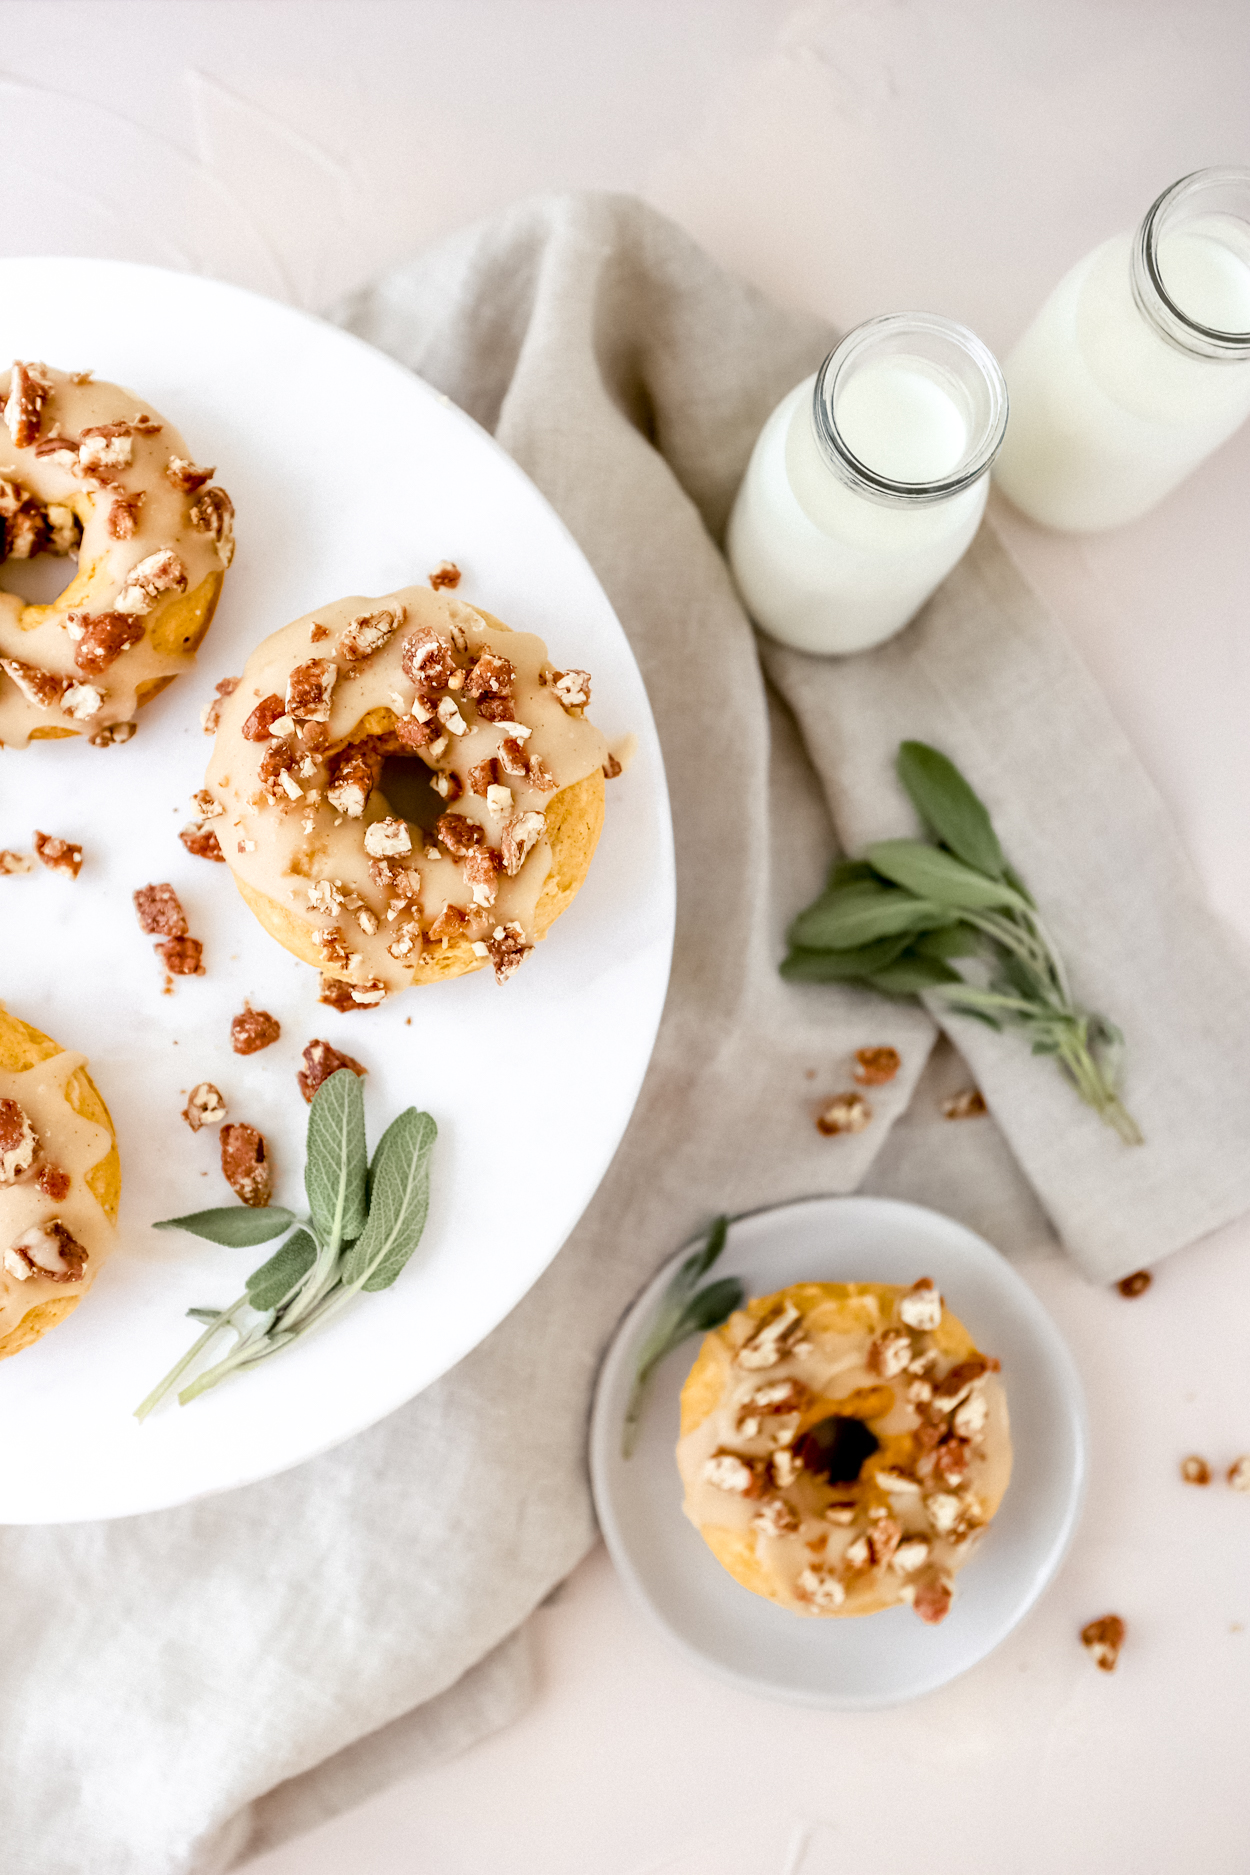 Baked Pumpkin Donuts topped with glaze and pecans on a white plate, glass jars of milk to the side